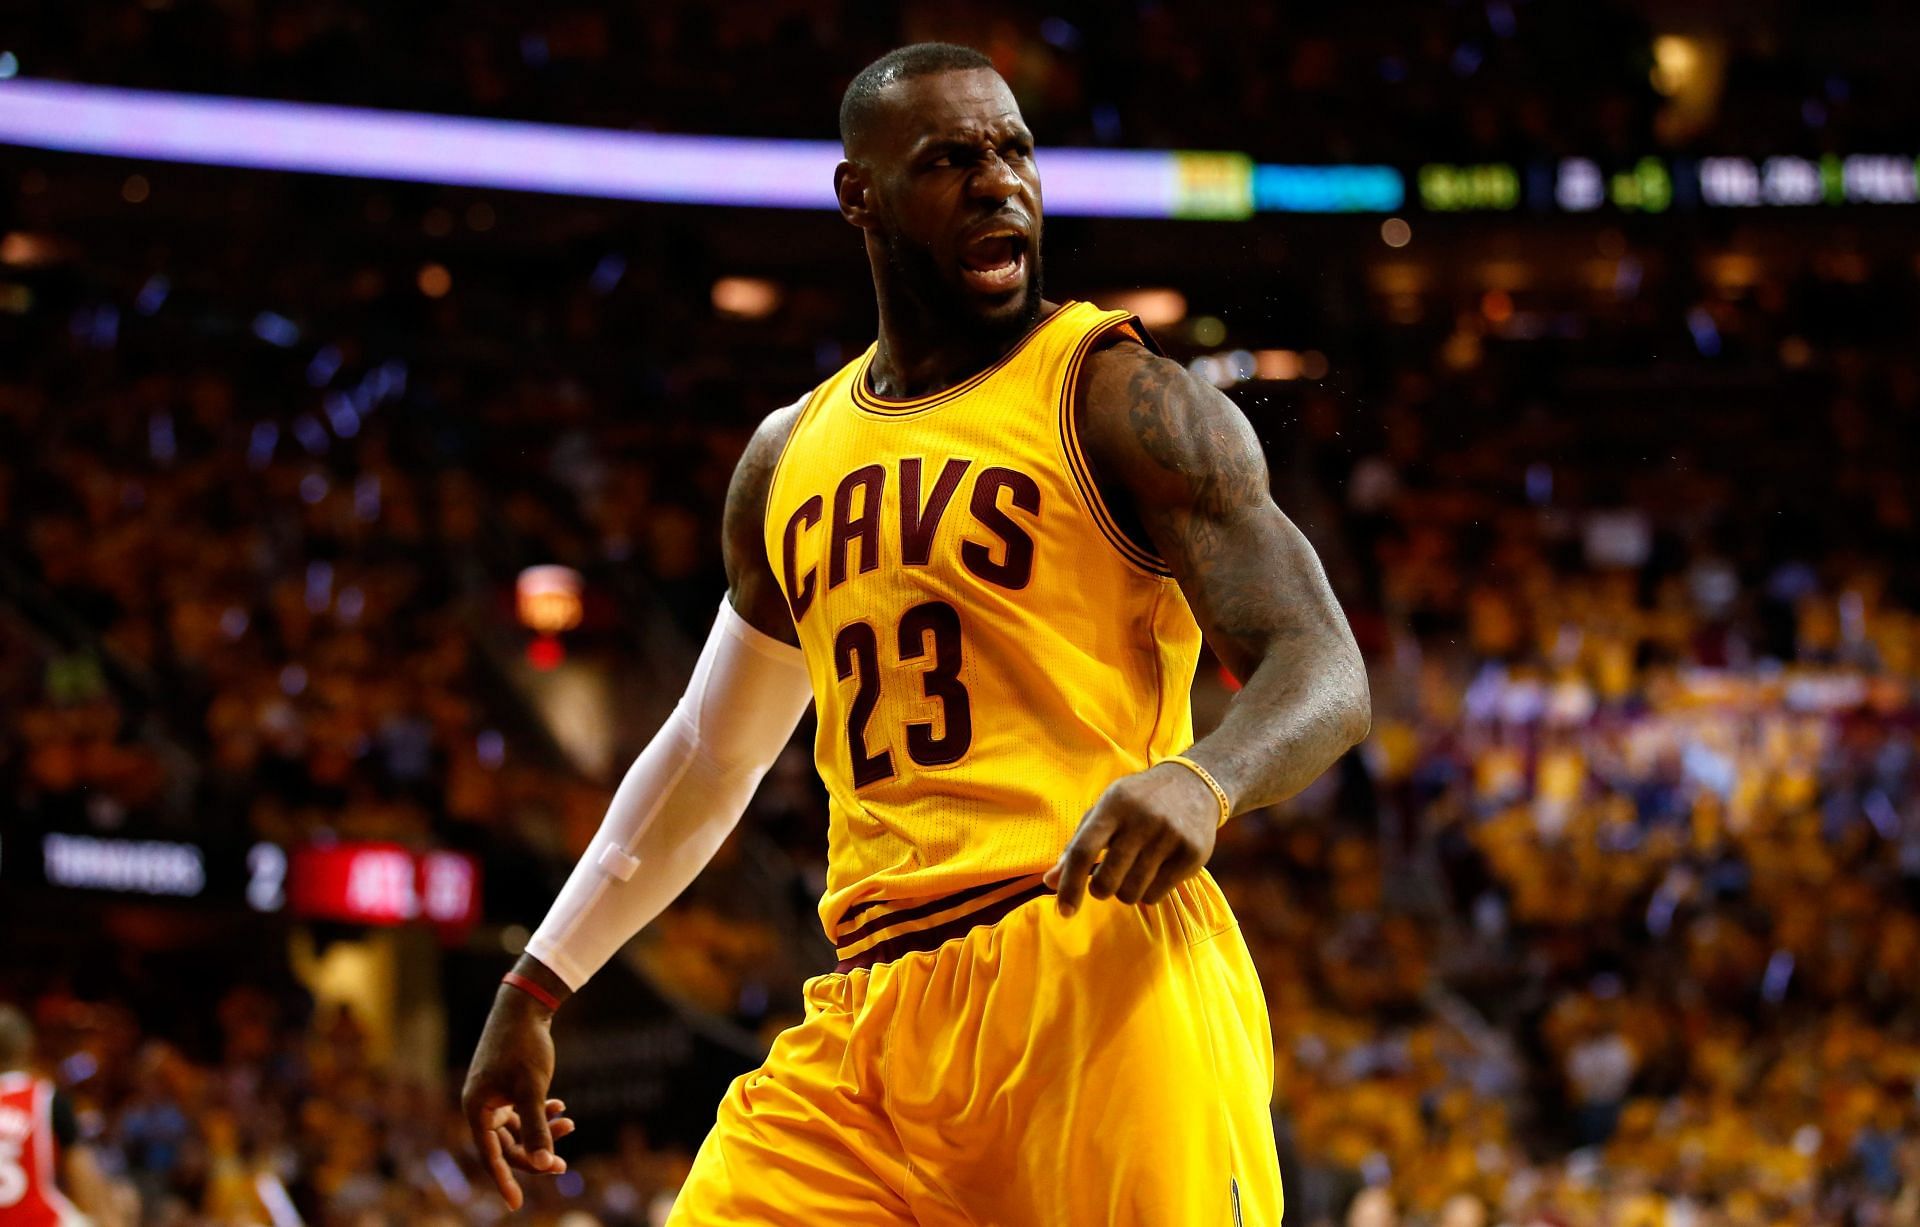 LeBron James had some historic NBA Playoff runs with the Cleveland Cavaliers